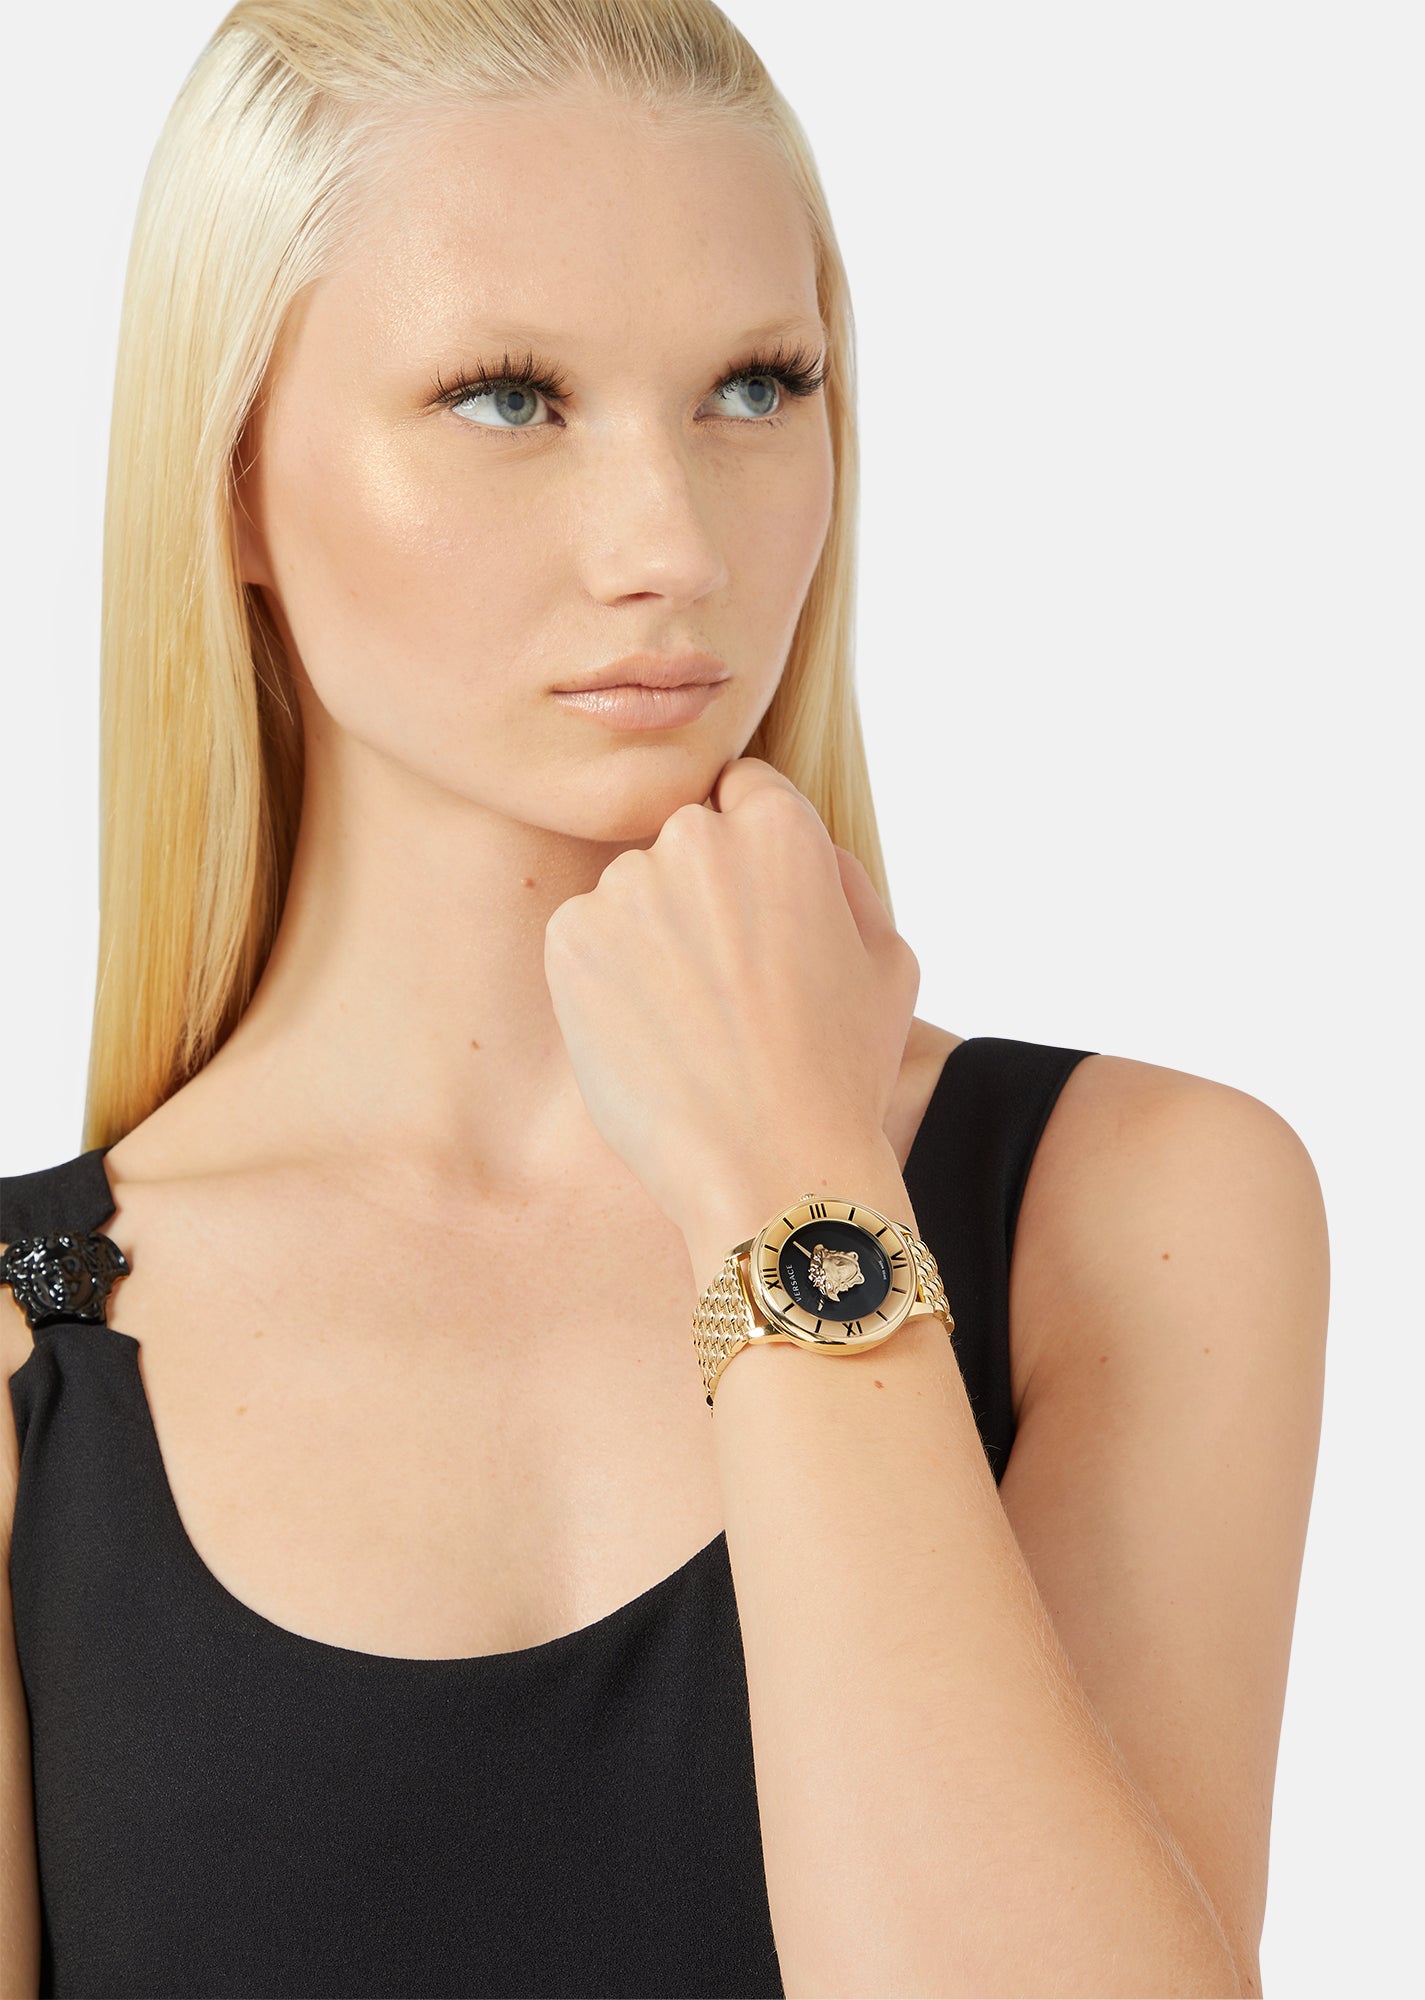 VERSACE Women's Watch VE2R00322 – Moments Watches & Jewelry